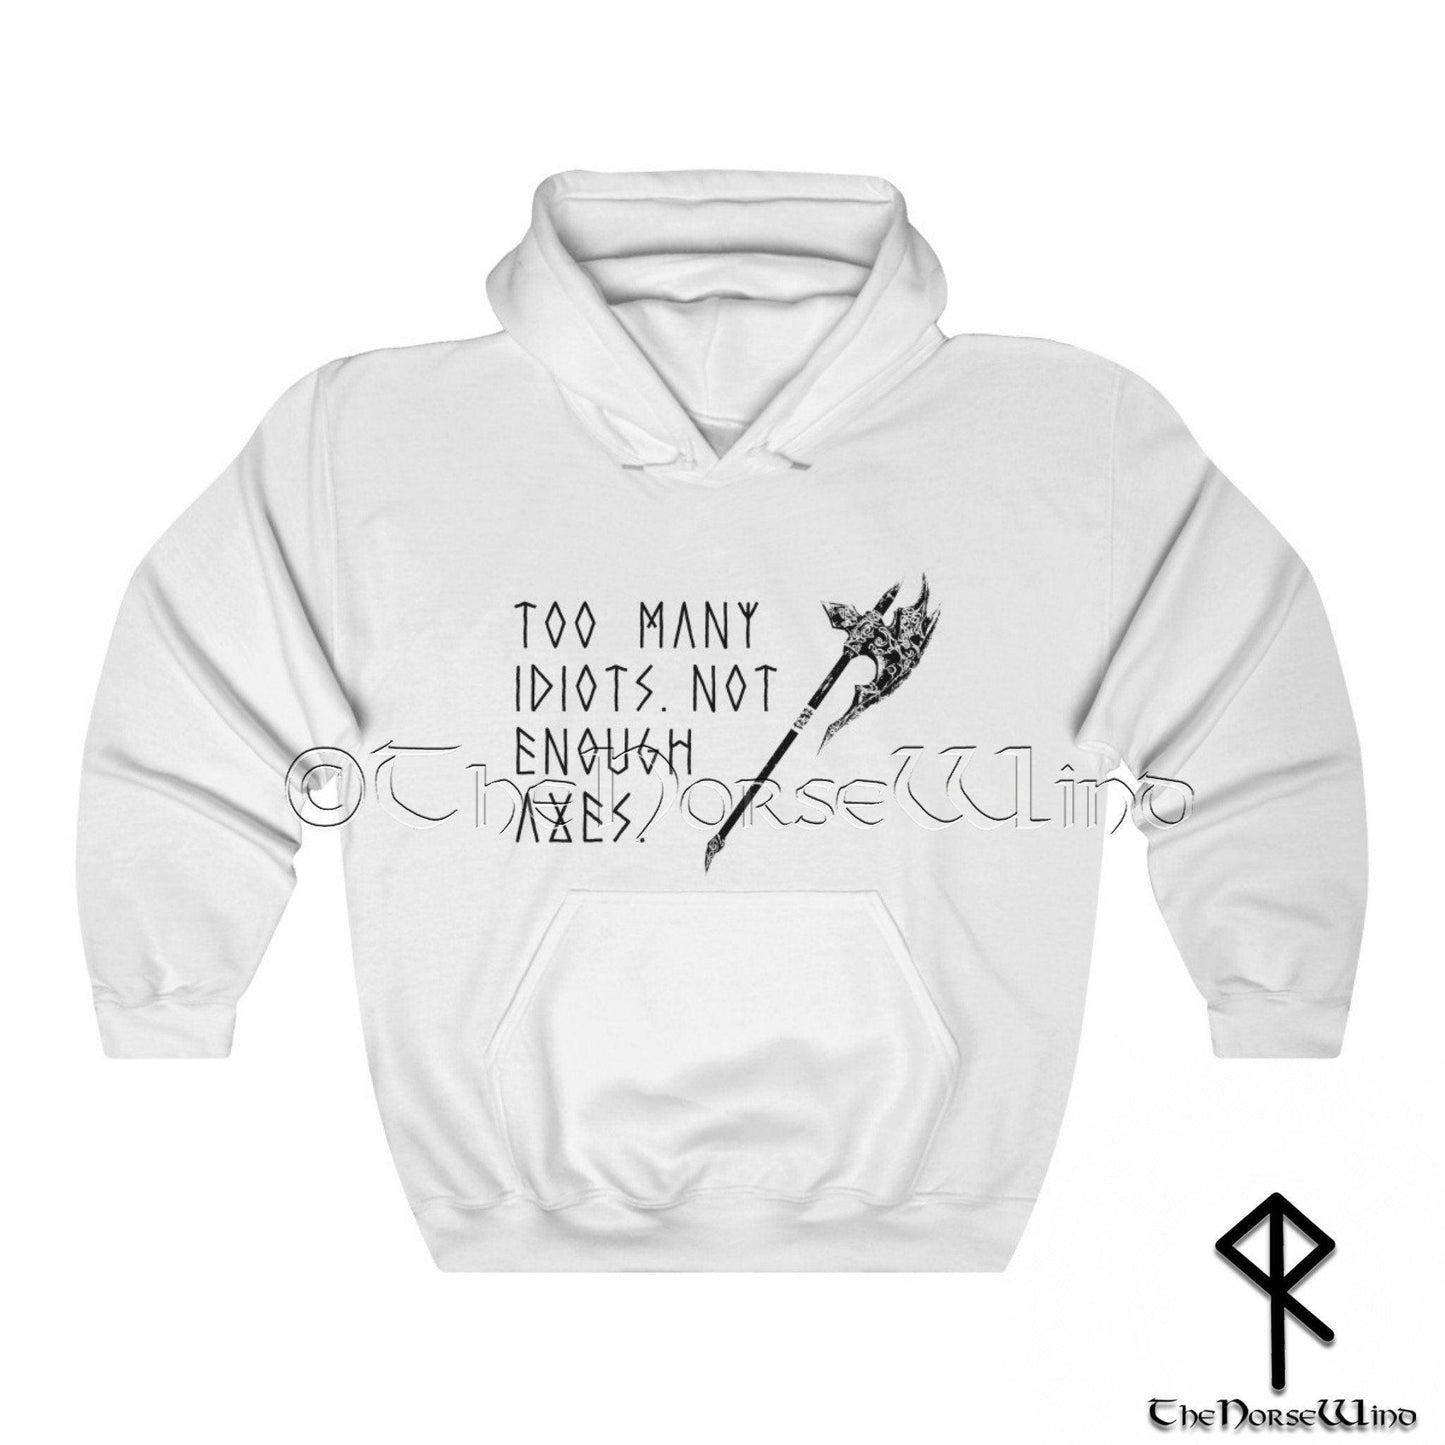 Viking Hoodie | Too Many Idiots Not Enough Axes | Unisex Viking Sweatshirt, S-5XL - TheNorseWind